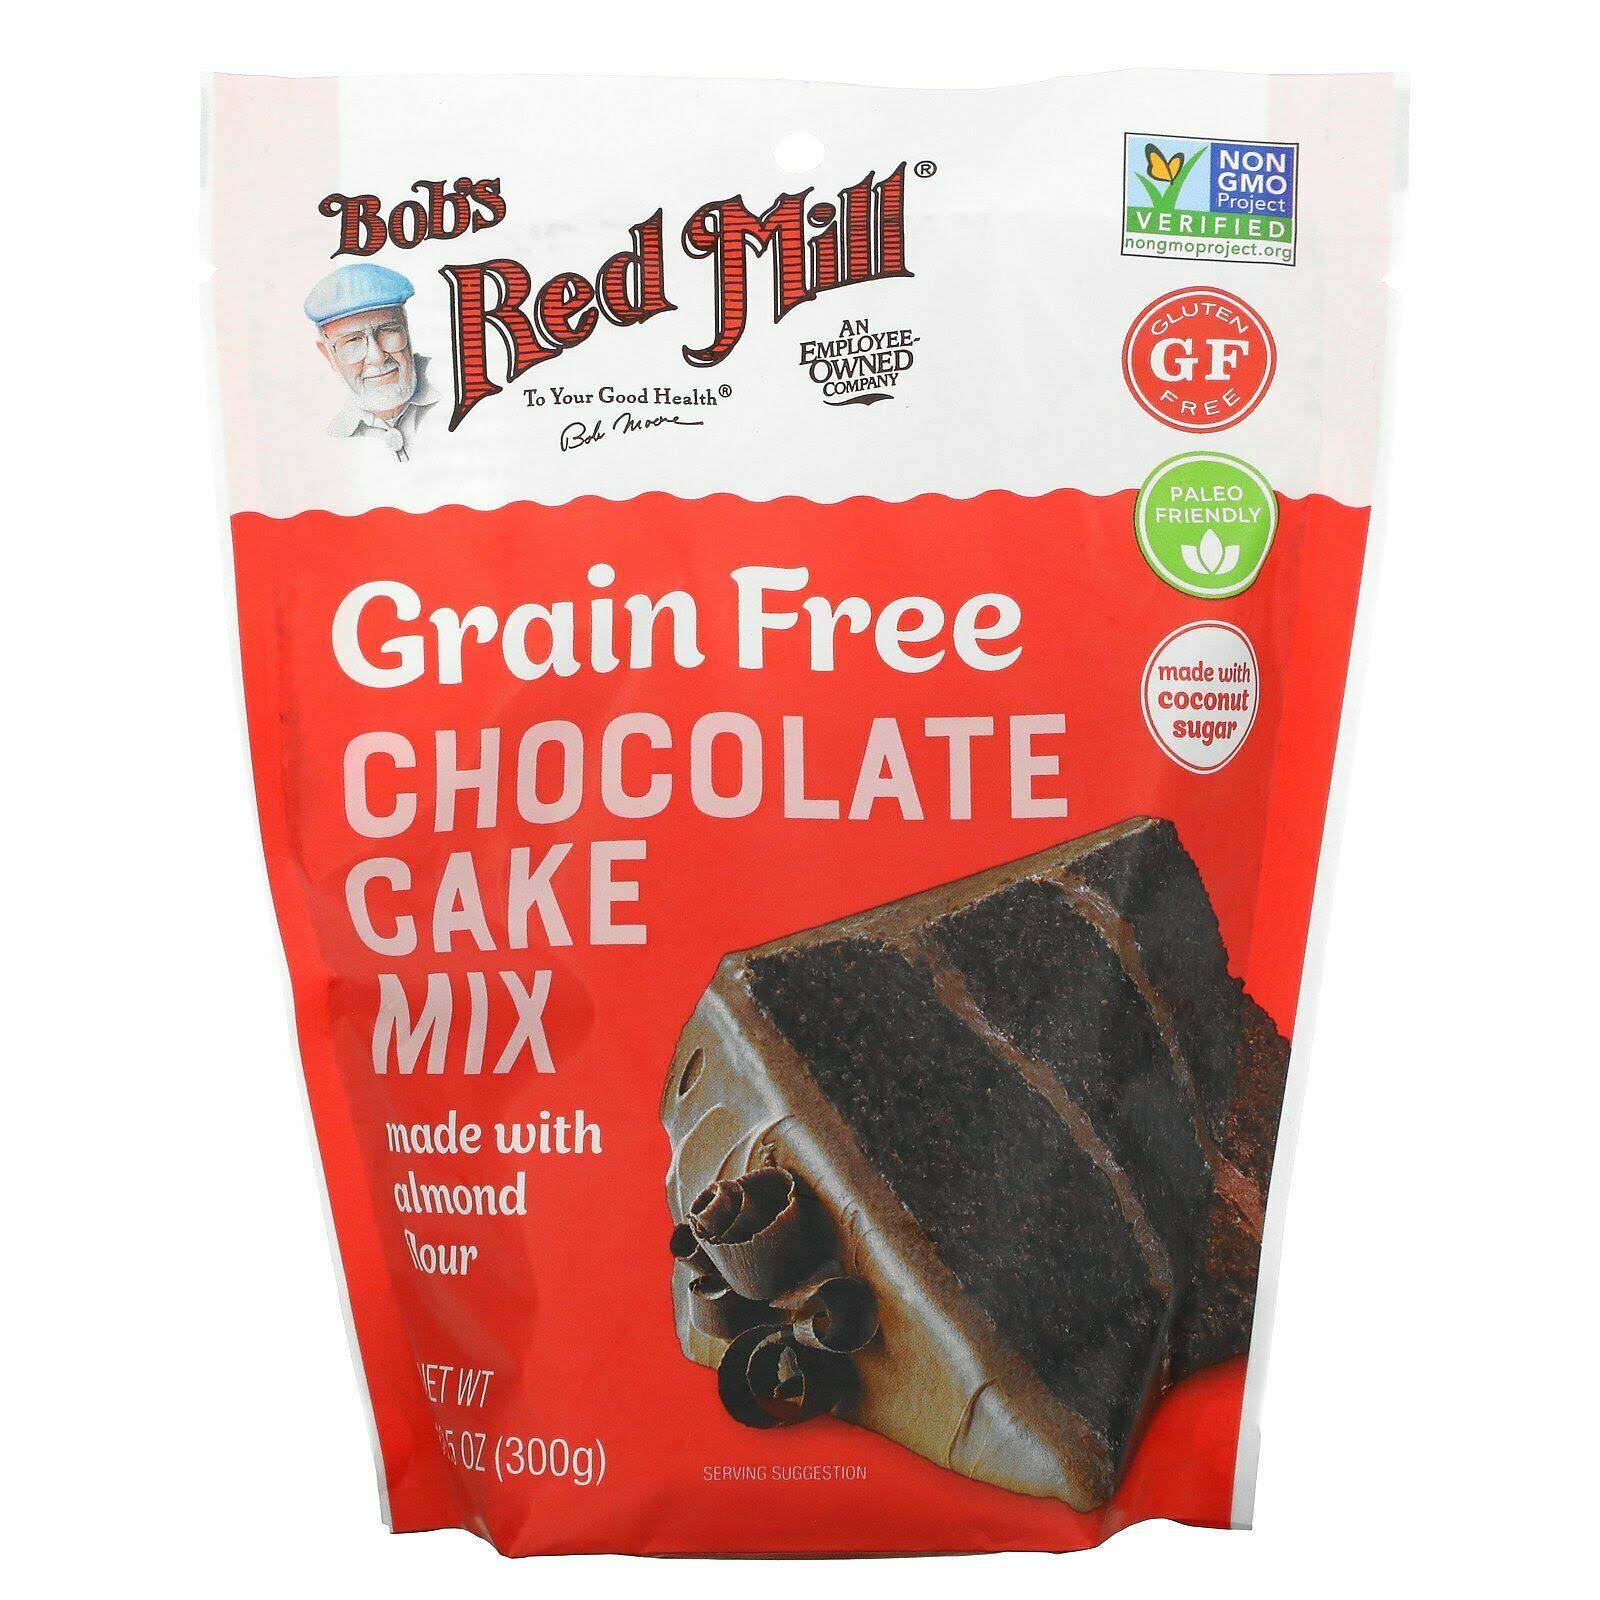 Bob's Red Mill, Chocolate Cake Mix, Made with almond Flour, 300g